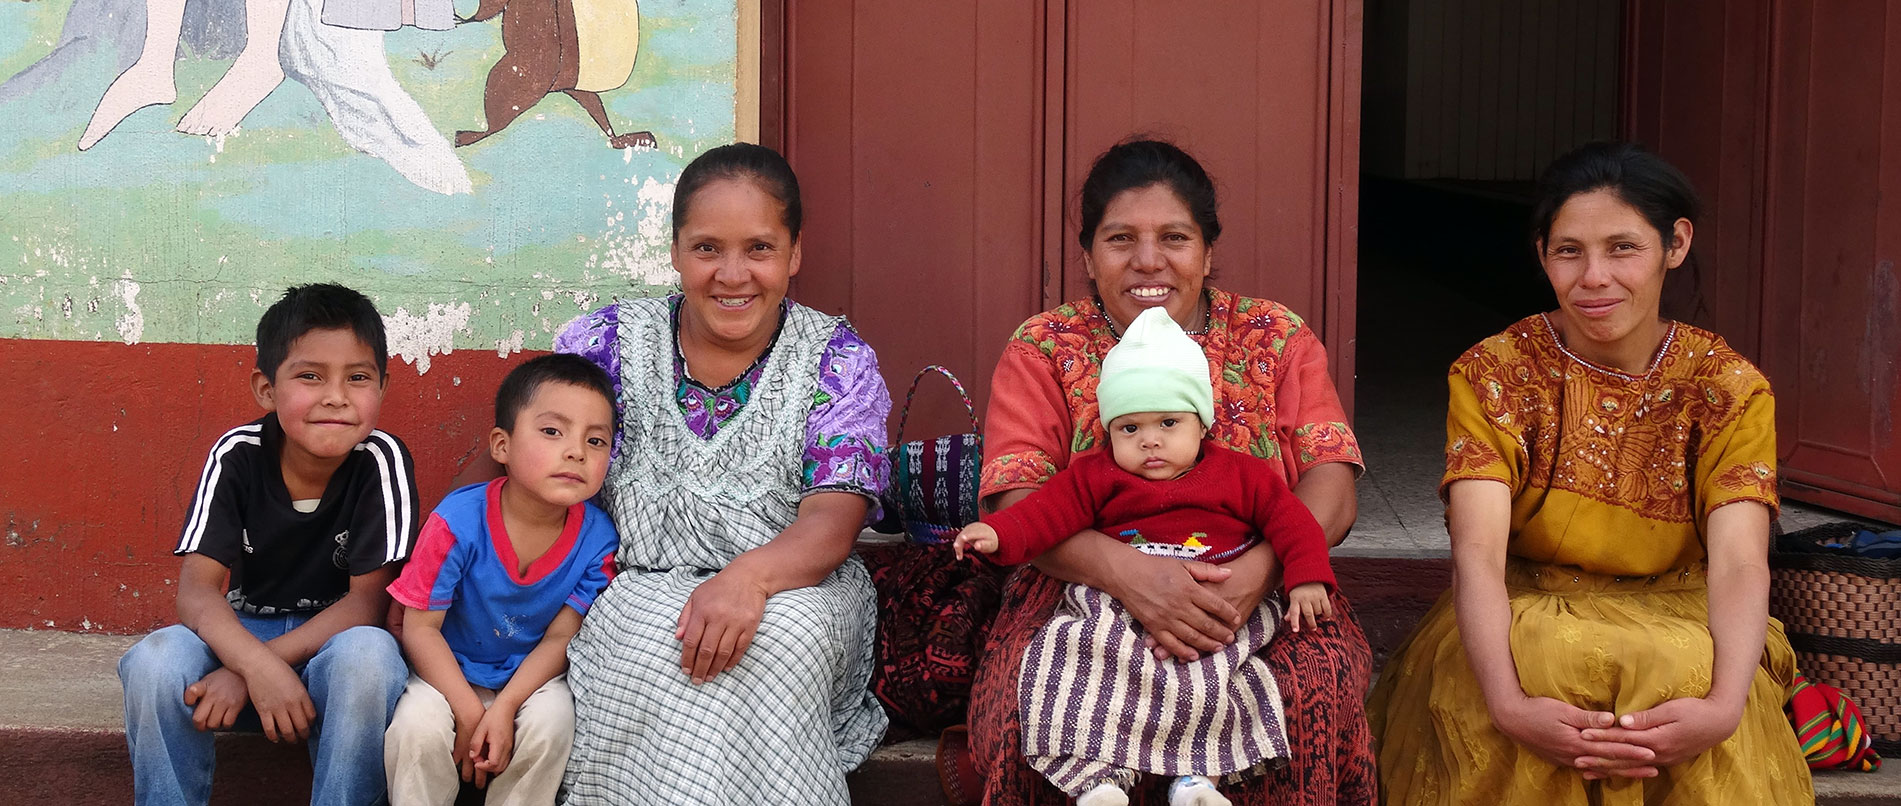 Guardians of Justice: An Immersive Human Rights Advocacy Experience in the Heart of Guatemala